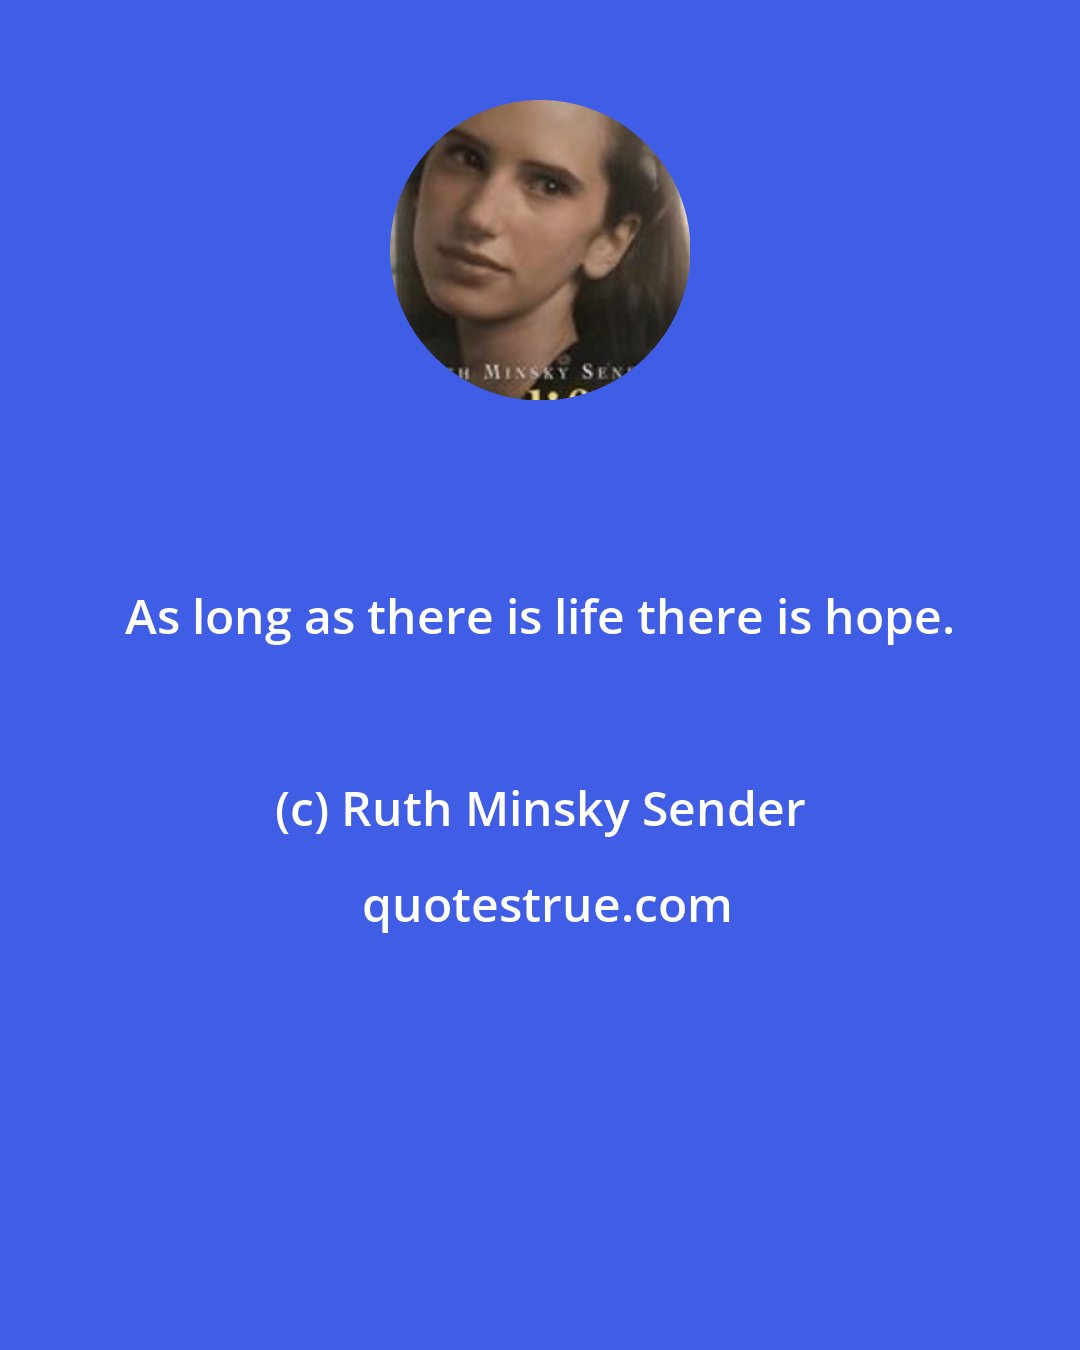 Ruth Minsky Sender: As long as there is life there is hope.